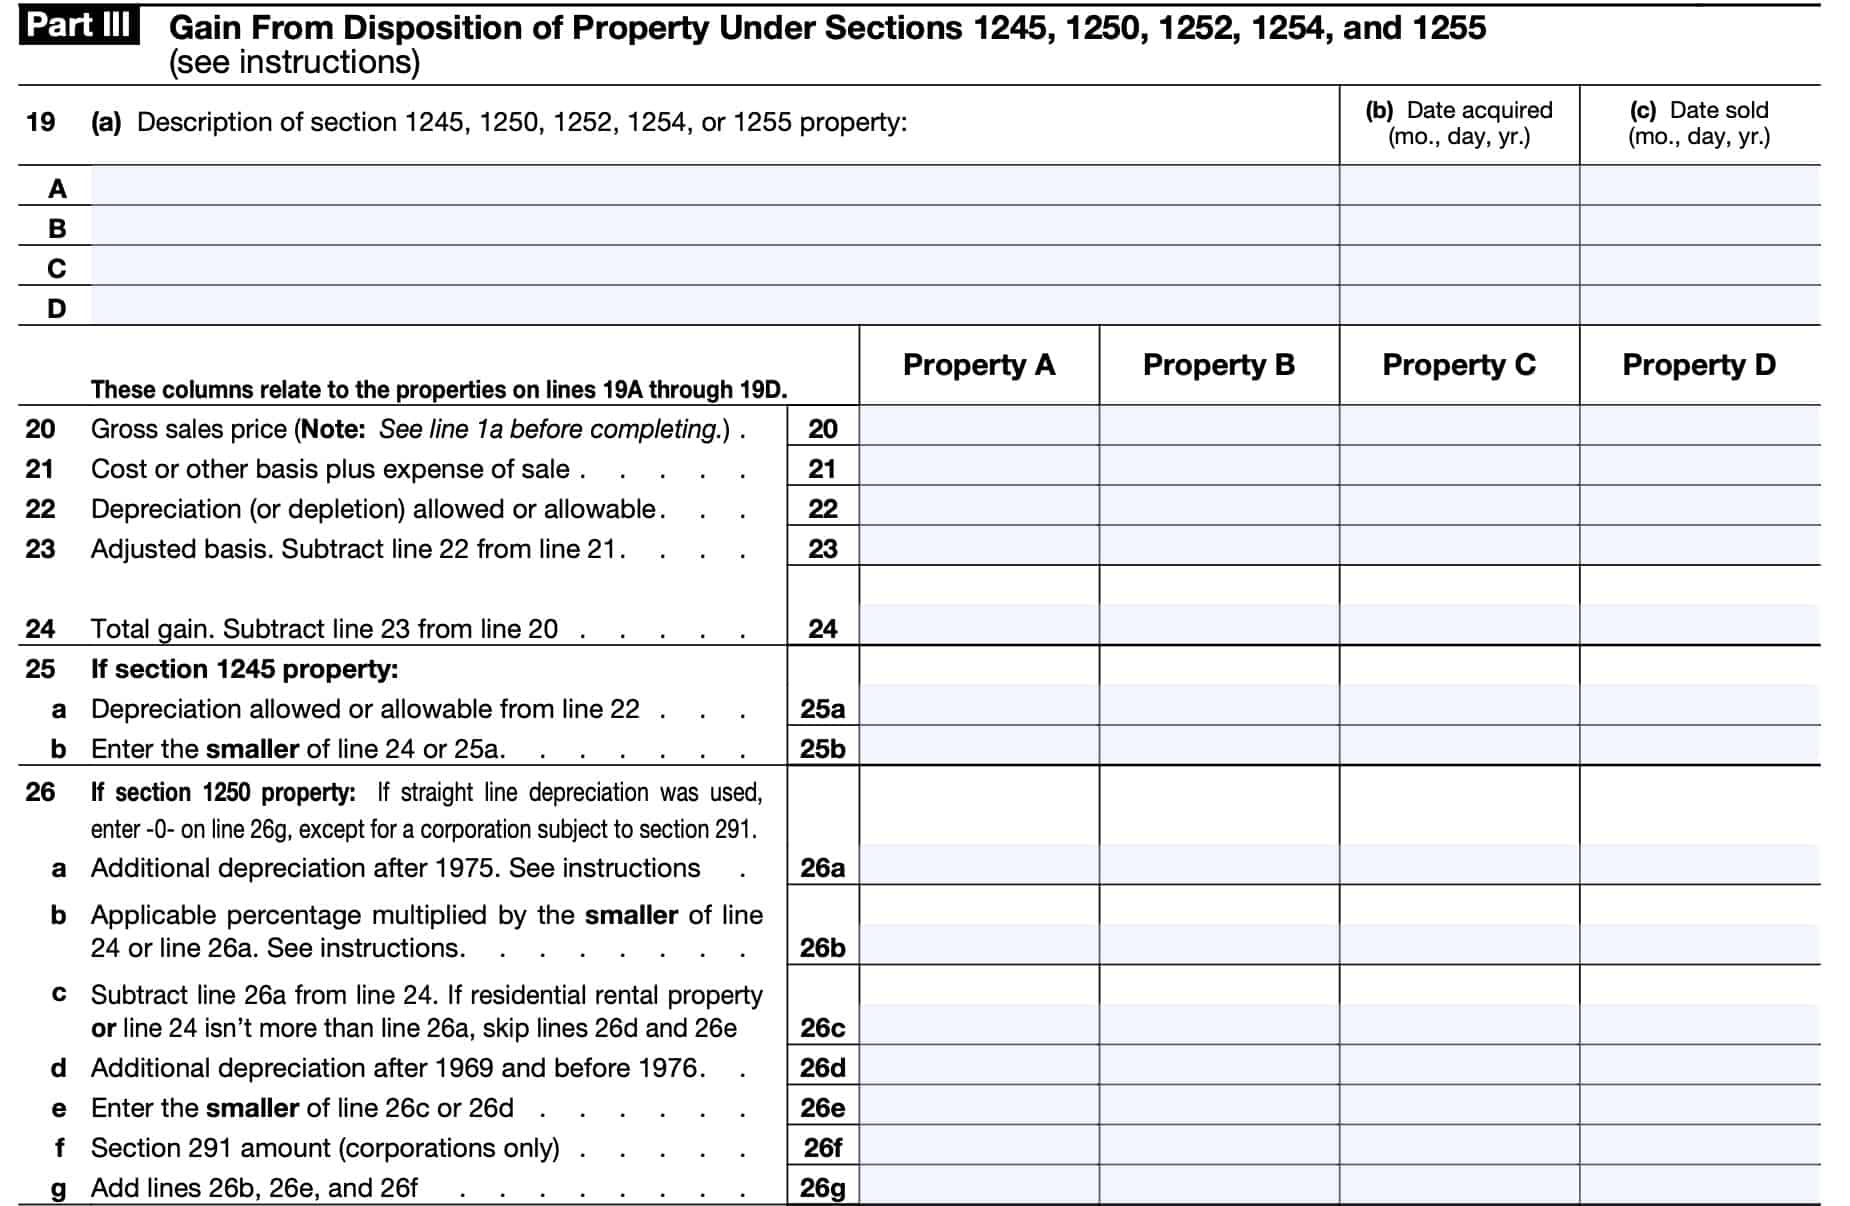 irs form 4797 part iii: gain from disposition of Section 1245 and 1250 property